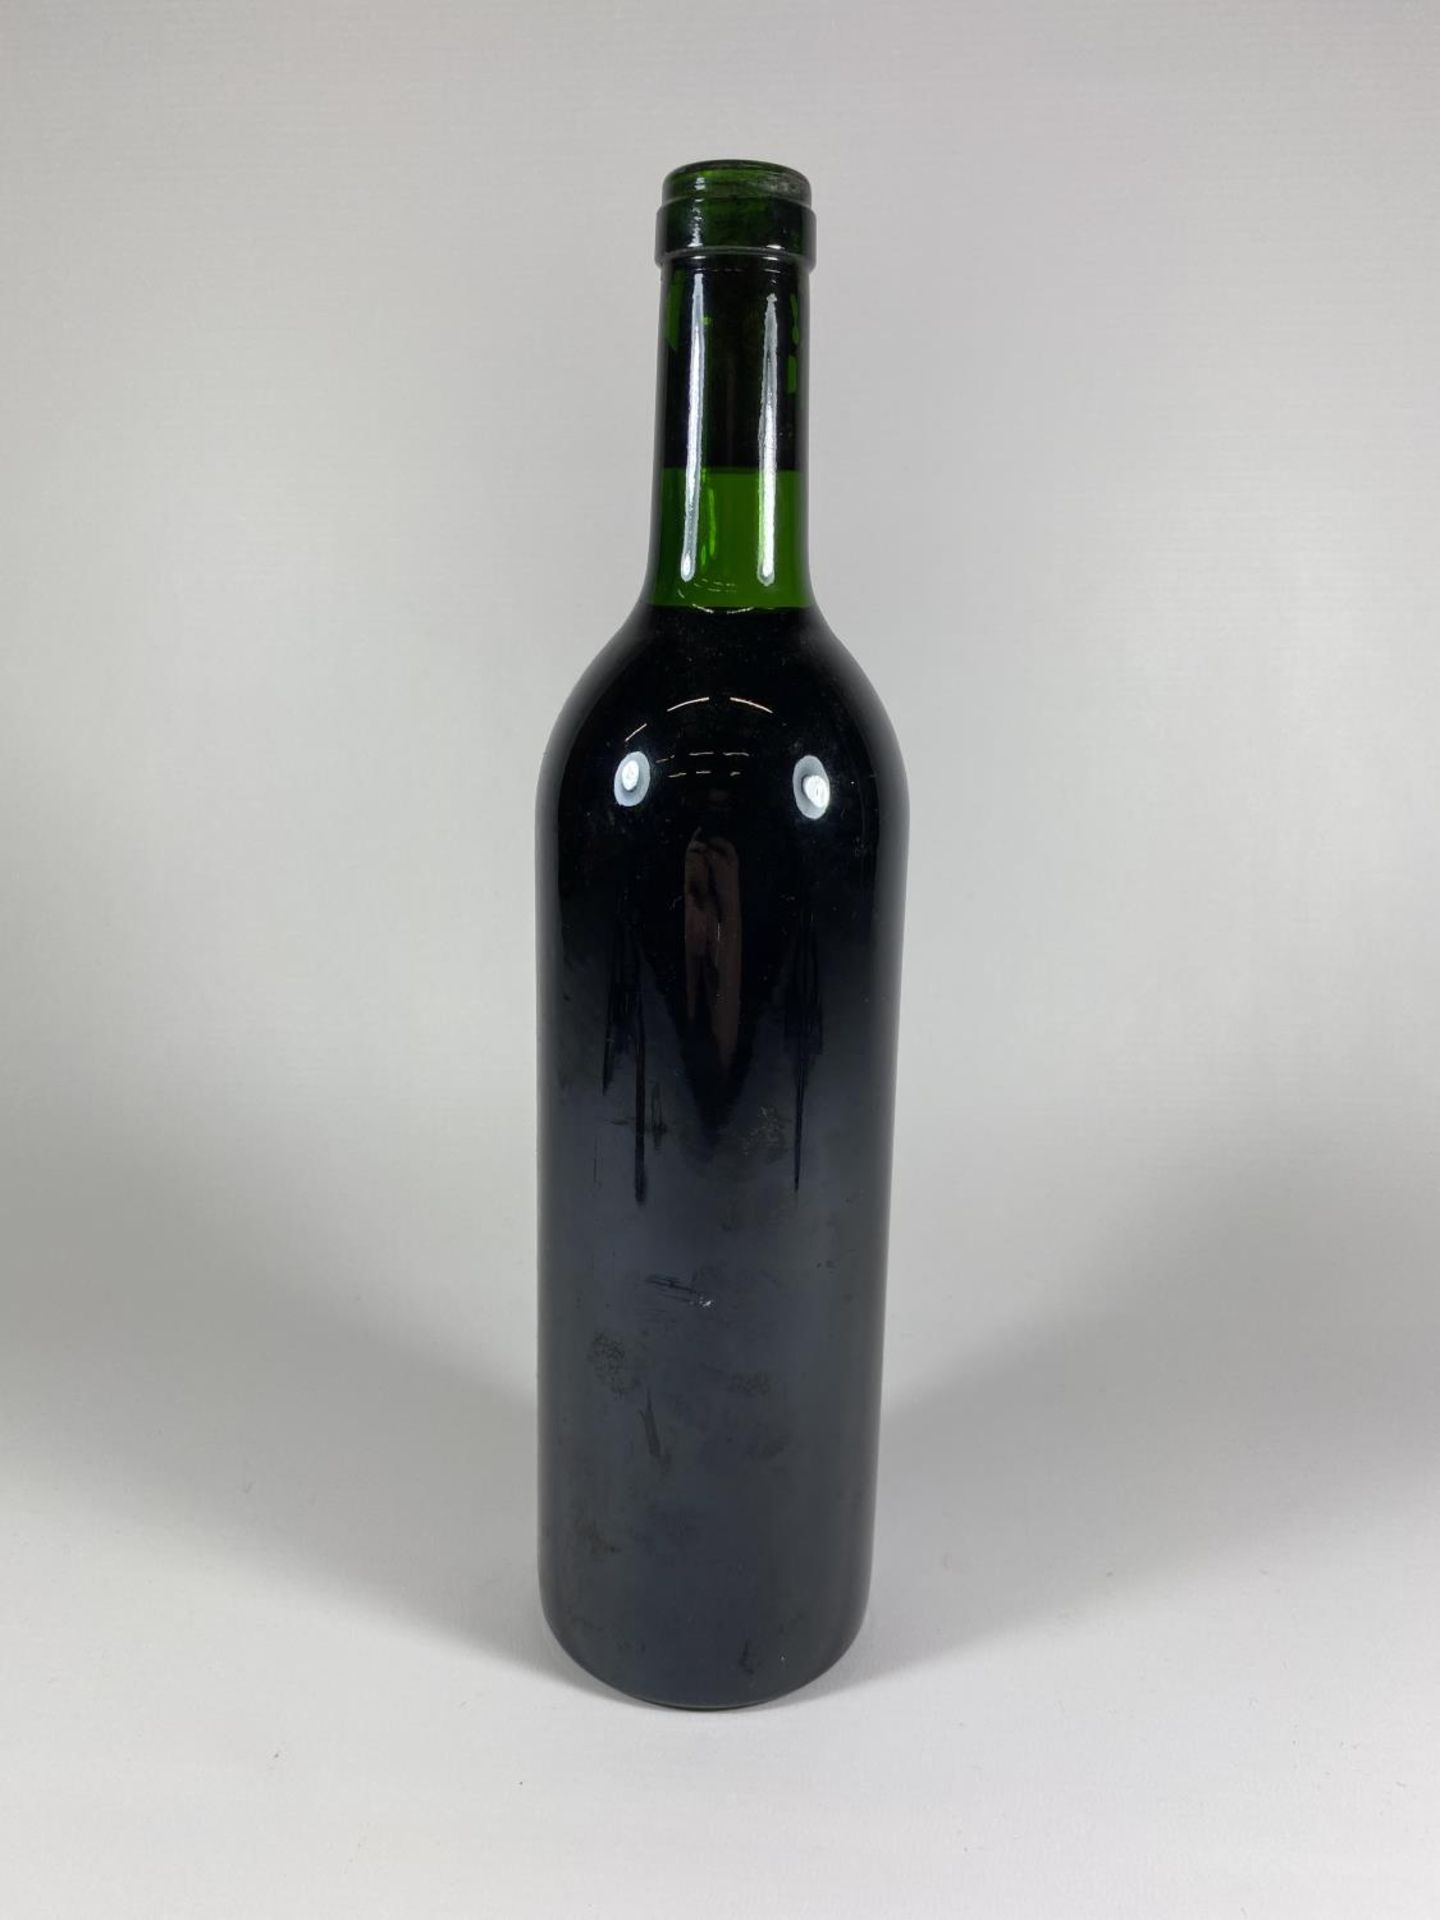 1 X 75CL BOTTLE - CHATEAU LAFITE ROTHSCHILD 1985 WINE - Image 5 of 8